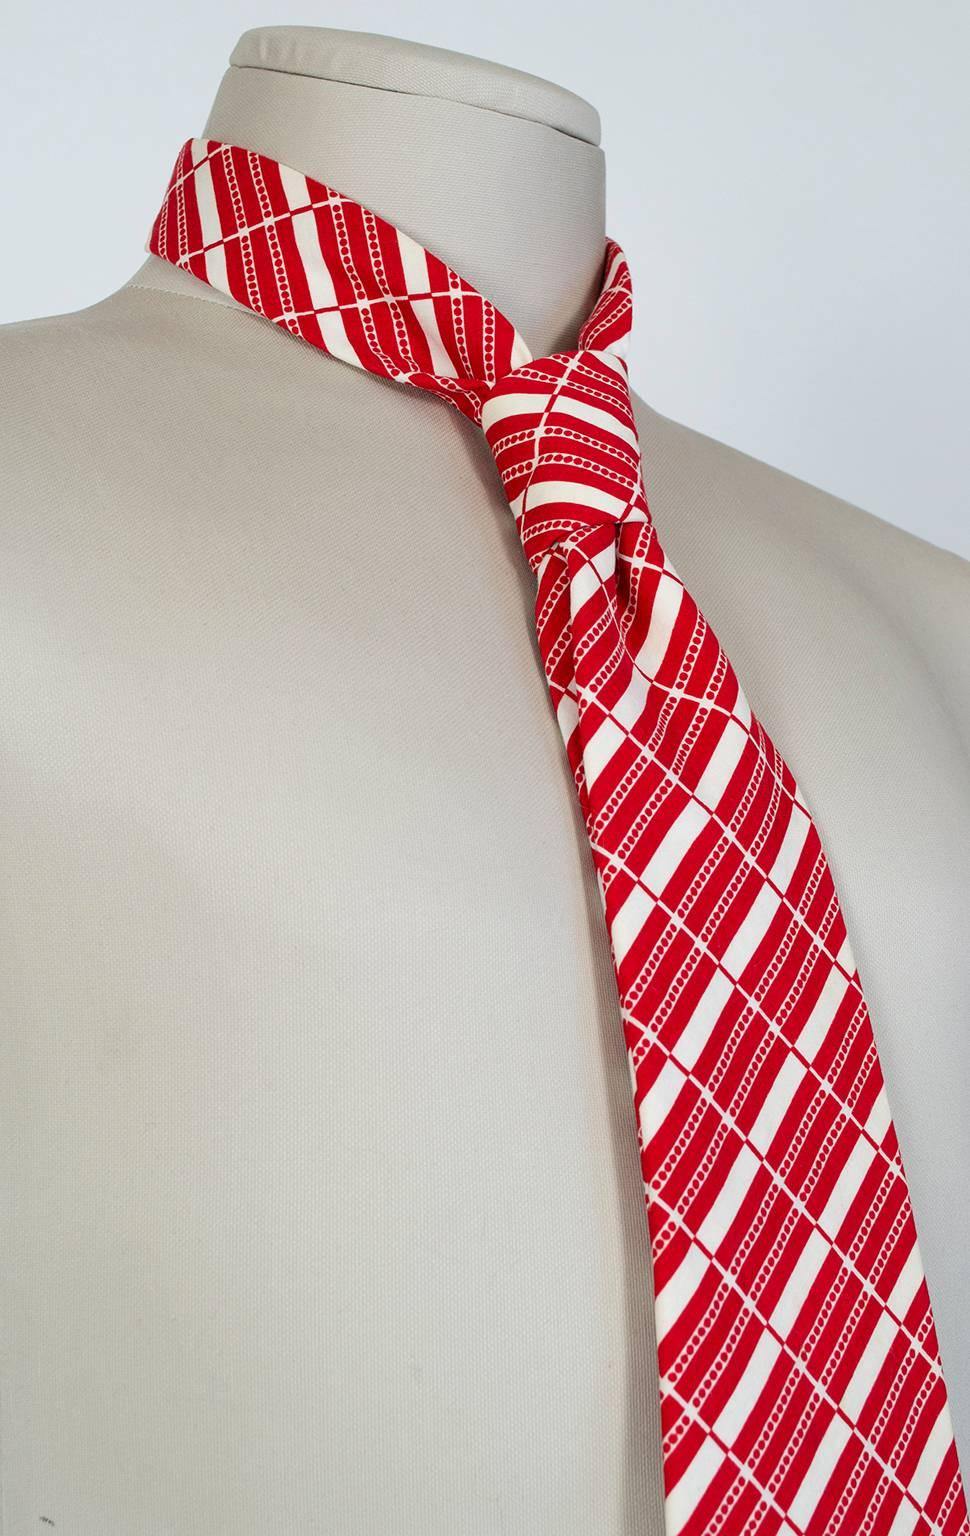 Crisp and nautical, this eye-catching tie brings modern playfulness to any ensemble. Made even cooler by its use of cotton poplin instead of the usual silk.

Red and white stripe and polka dot graphic print tie.


fabric: cotton poplin
noteworthy: 